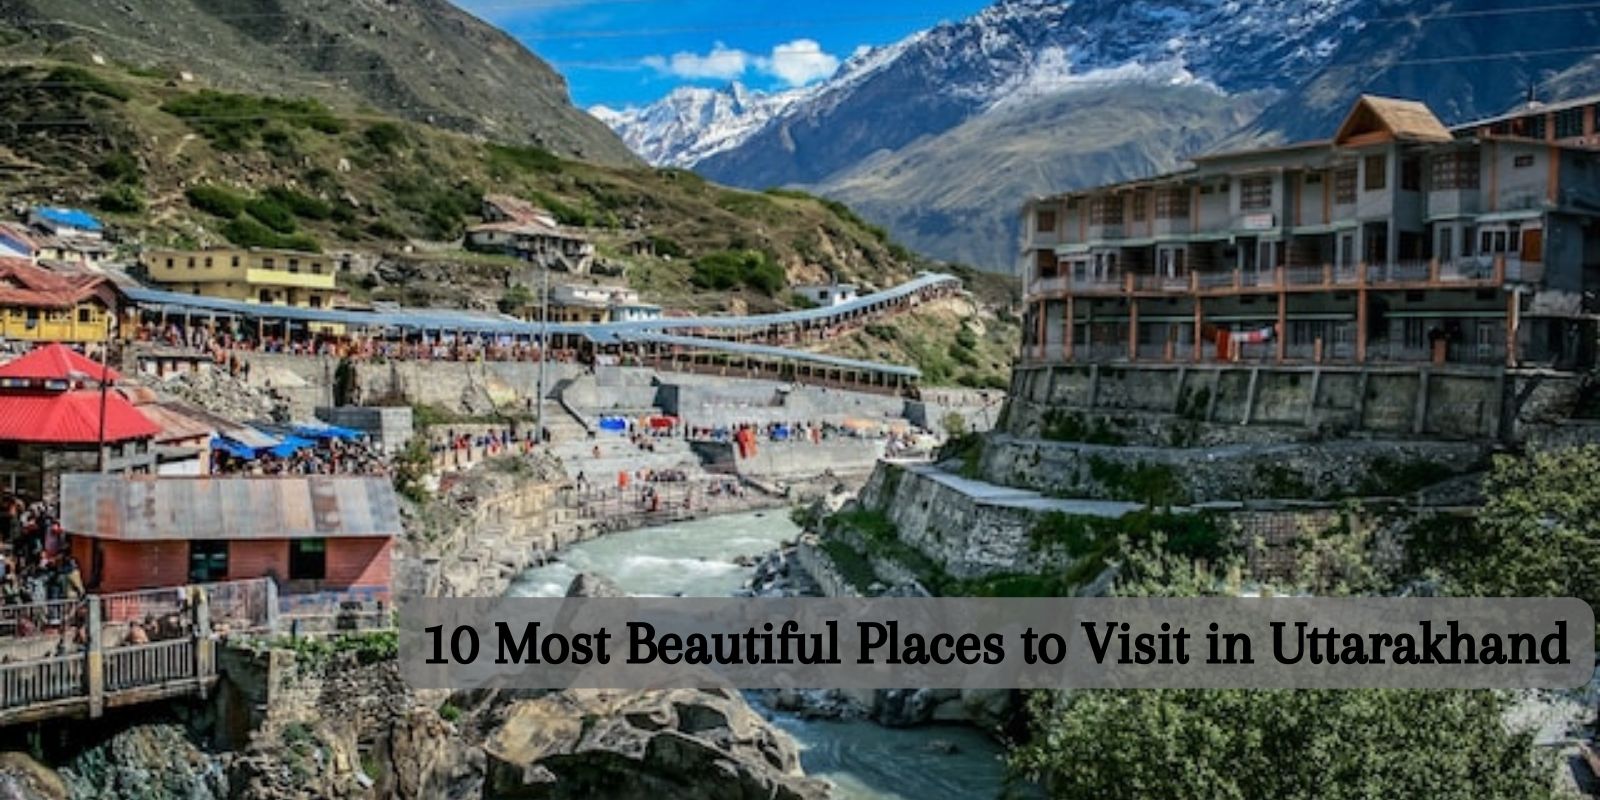 10-Most-Beautiful-Places-to-Visit-in-Uttarakhand